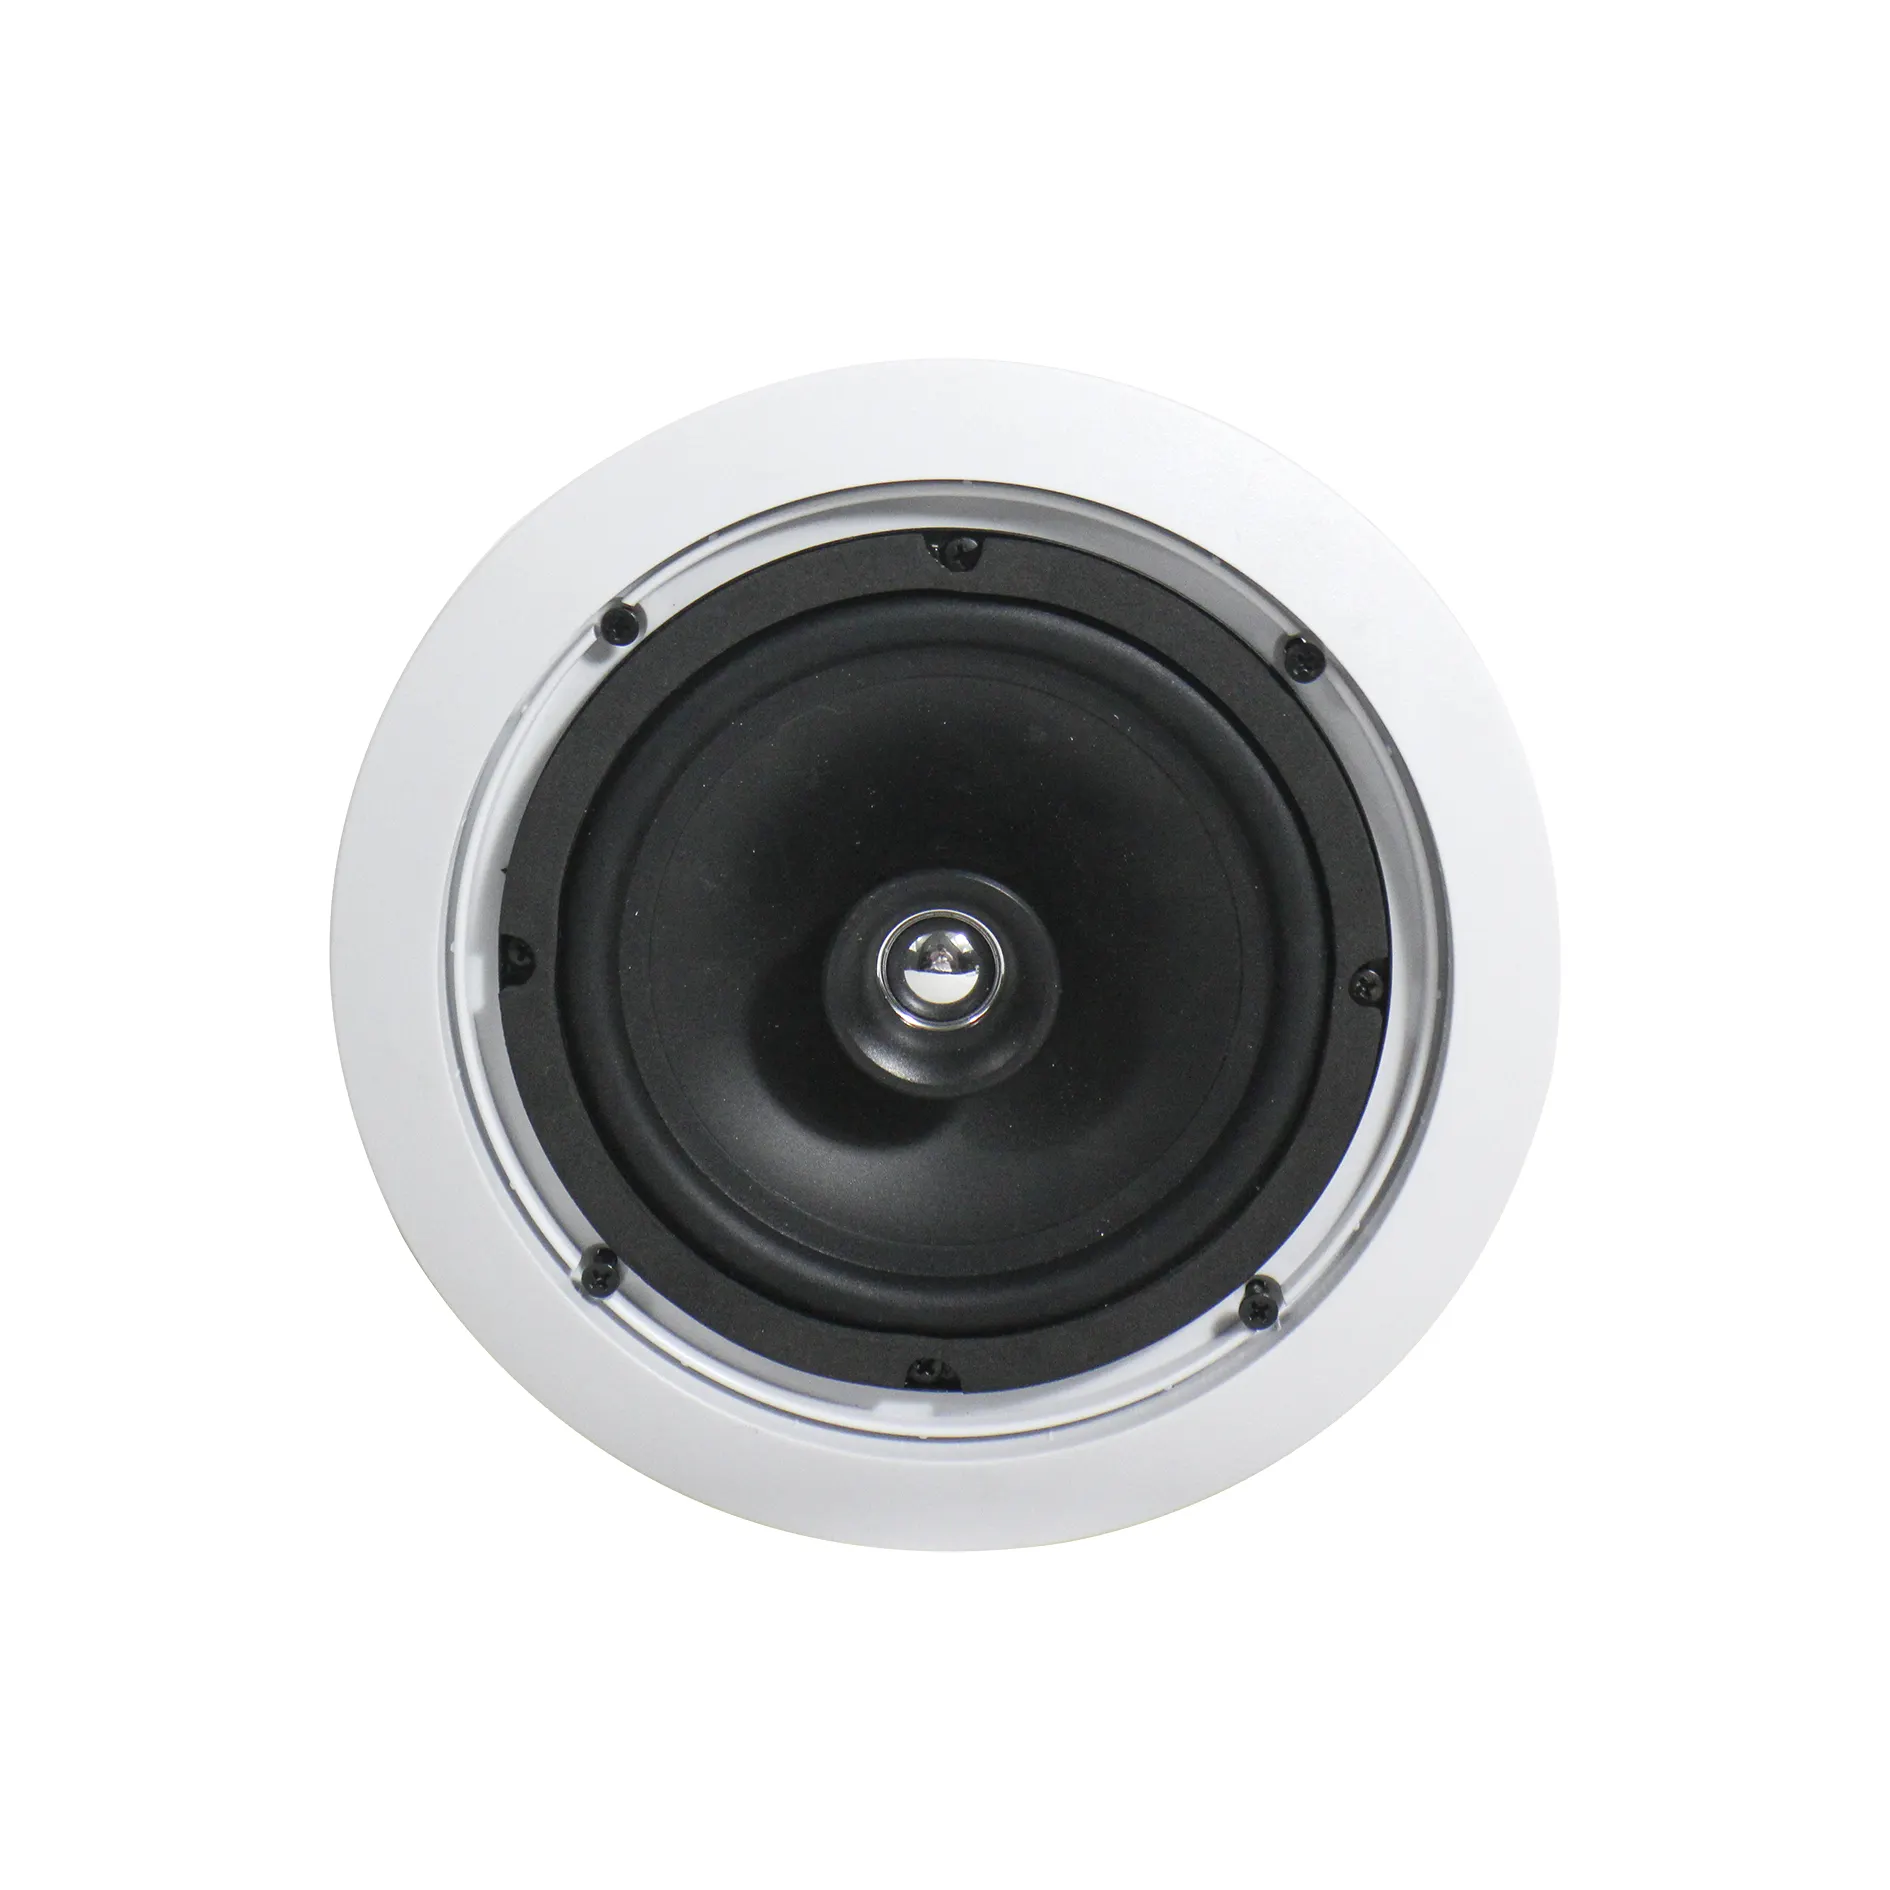 210114 6 Inch 20 Watt Plastic PA Bass Coaxial Full Range Ceiling Speaker with Tweeter and Crossover for Bar, Hotel, Home etc